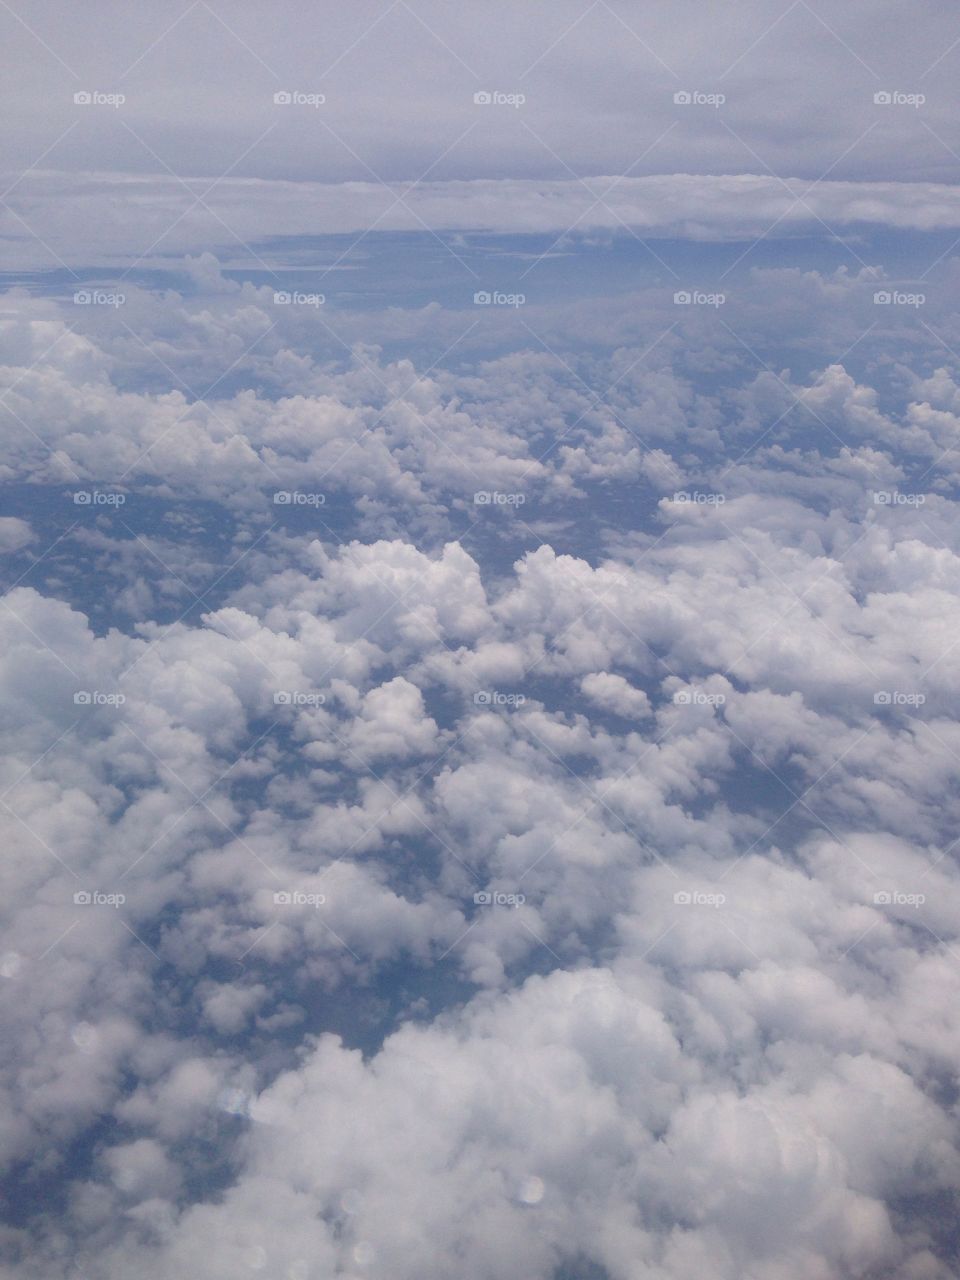 Clouds looking out of a airplane